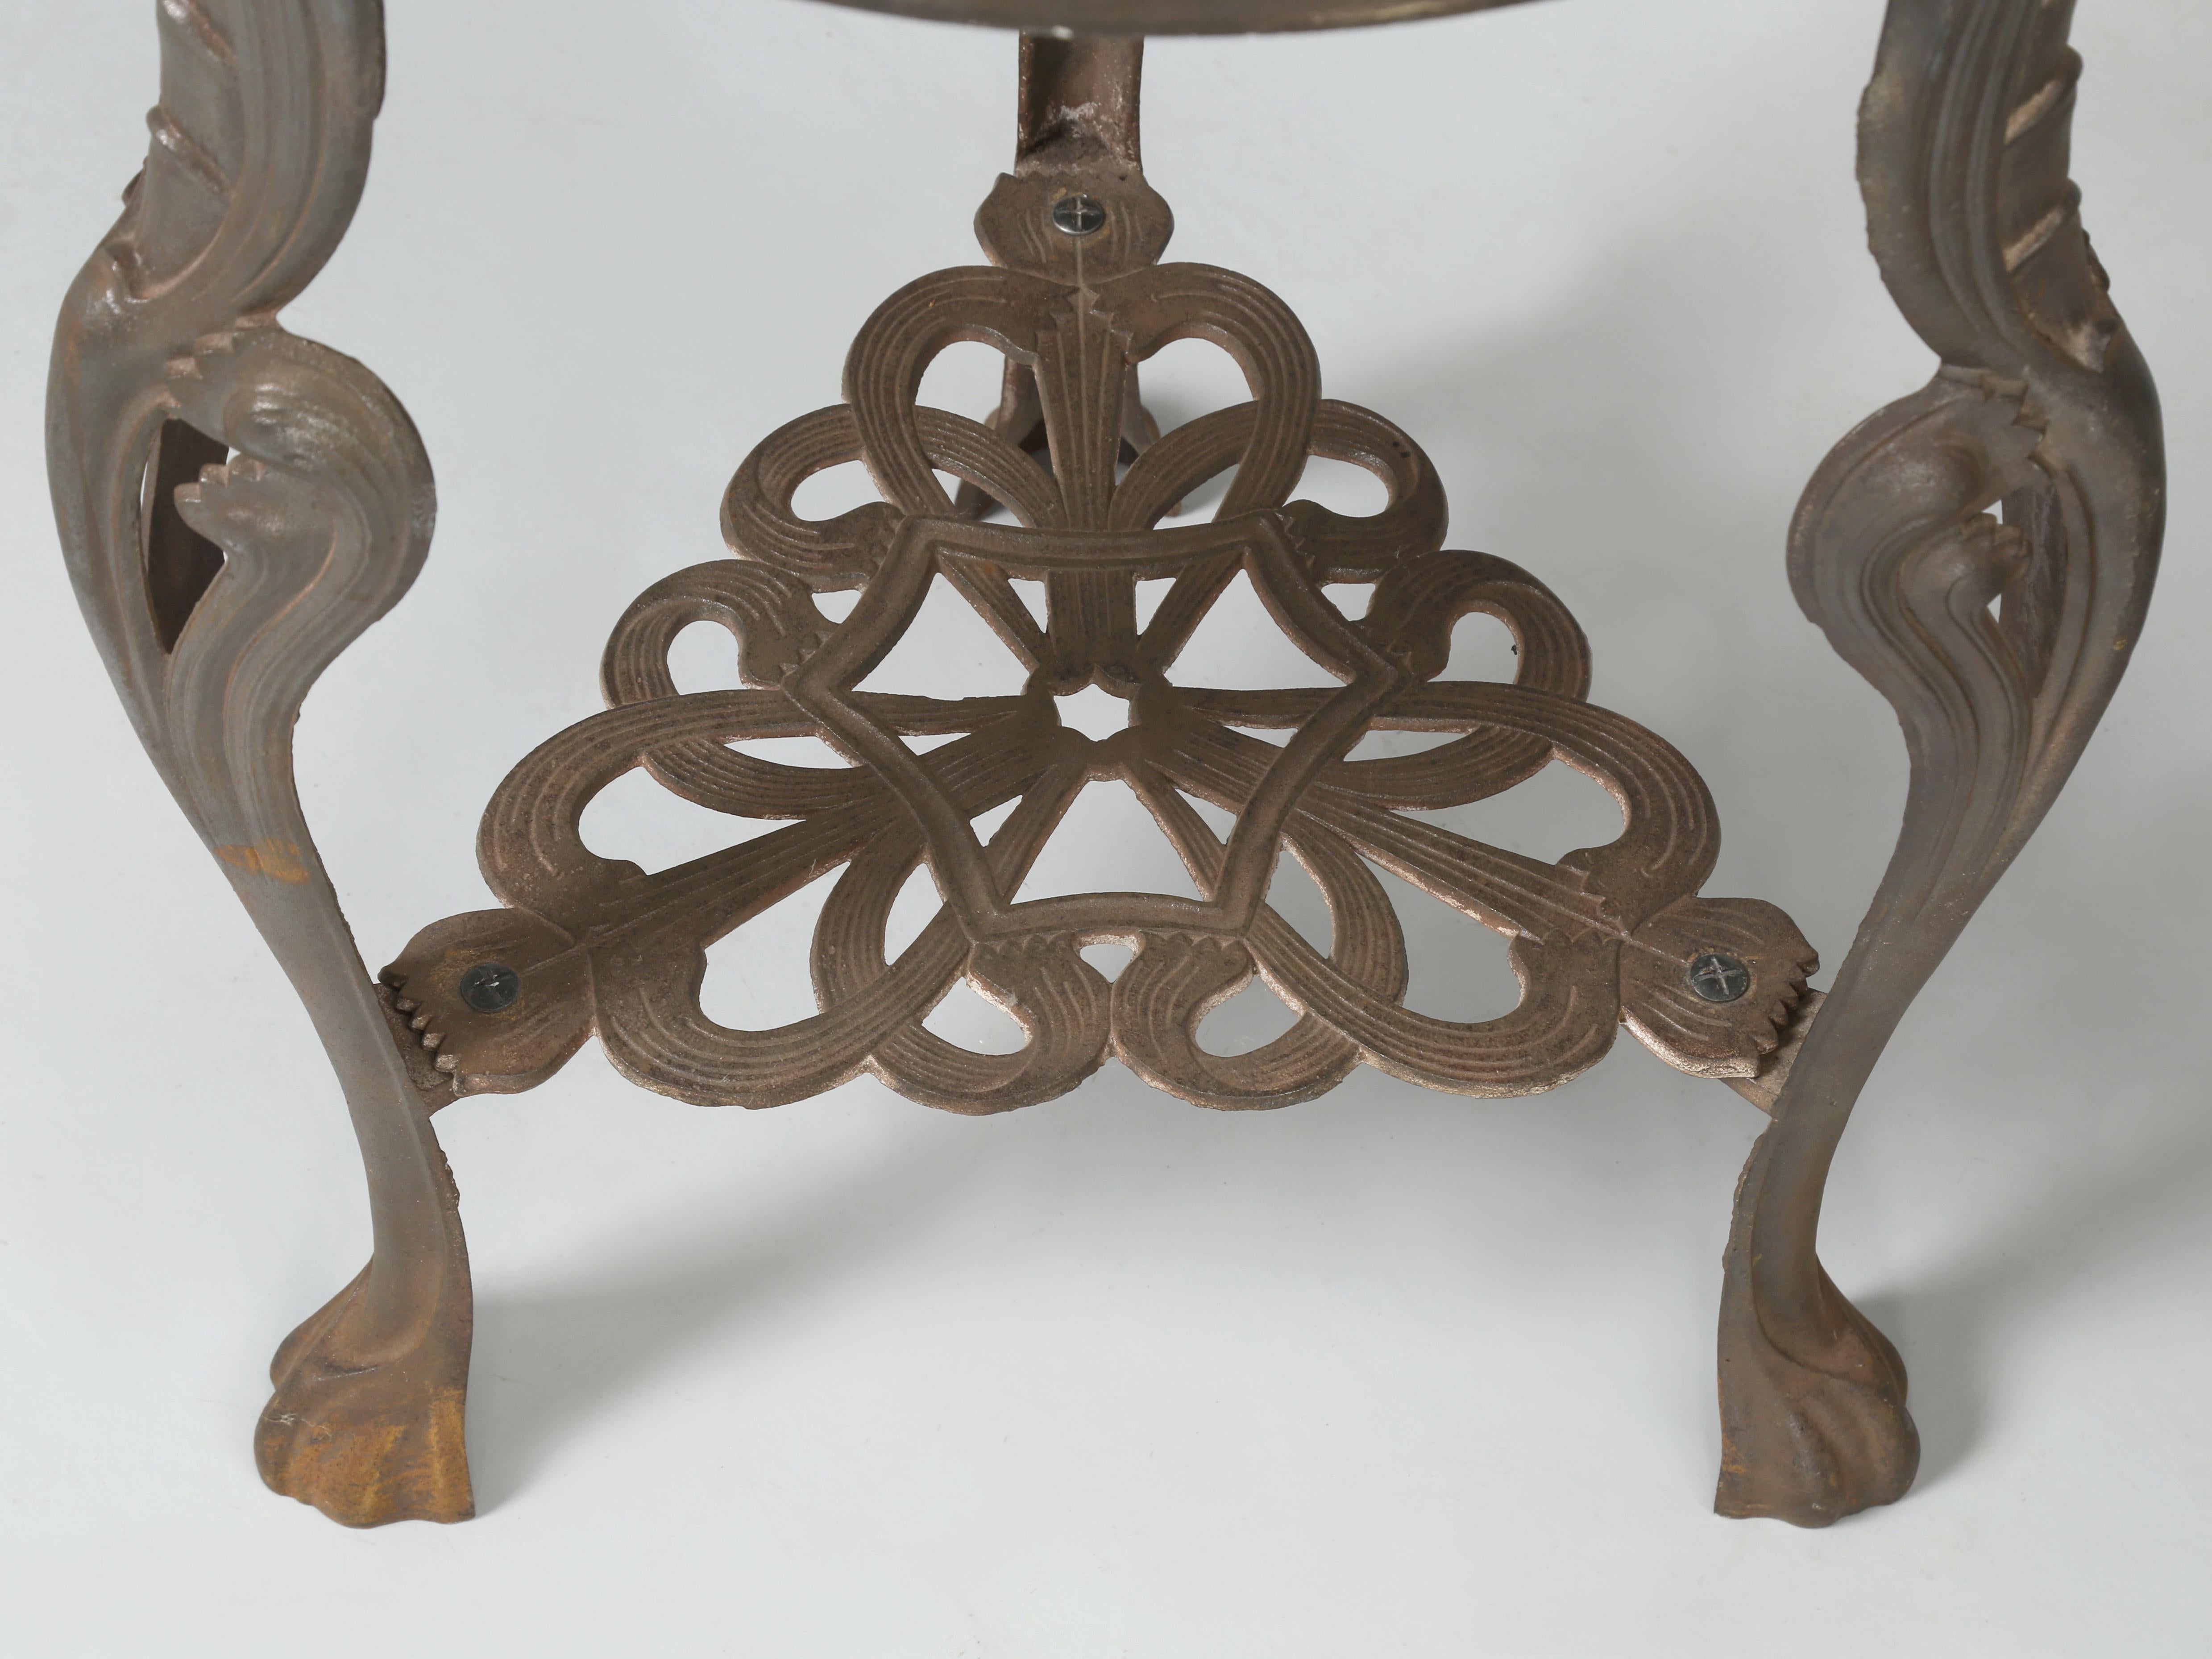 Near Pair of French Art Nouveau Guéridon Cast Iron Tables with Stone Tops For Sale 9